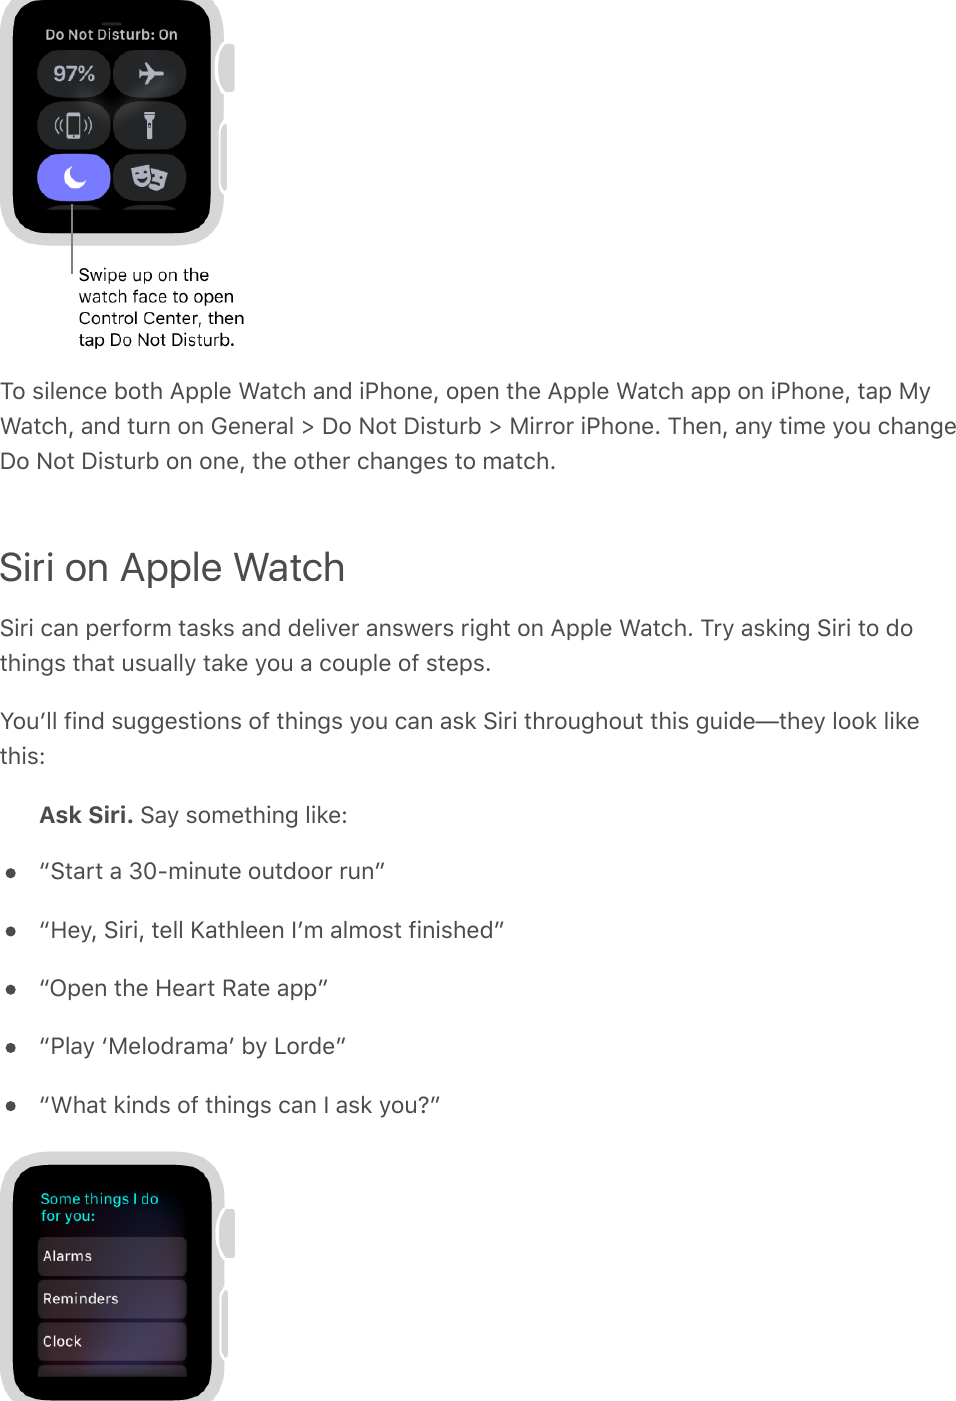 To silence both Apple Watch and iPhone, open the Apple Watch app on iPhone, tap MyWatch, and turn on General &gt; Do Not Disturb &gt; Mirror iPhone. Then, any time you changeDo Not Disturb on one, the other changes to match.Siri on Apple WatchSiri can perform tasks and deliver answers right on Apple Watch. Try asking Siri to dothings that usually take you a couple of steps.Youʼll find suggestions of things you can ask Siri throughout this guide—they look likethis:Ask Siri. Say something like:“Start a 30-minute outdoor run”“Hey, Siri, tell Kathleen Iʼm almost finished”“Open the Heart Rate app”“Play ‘Melodramaʼ by Lorde”“What kinds of things can I ask you?”